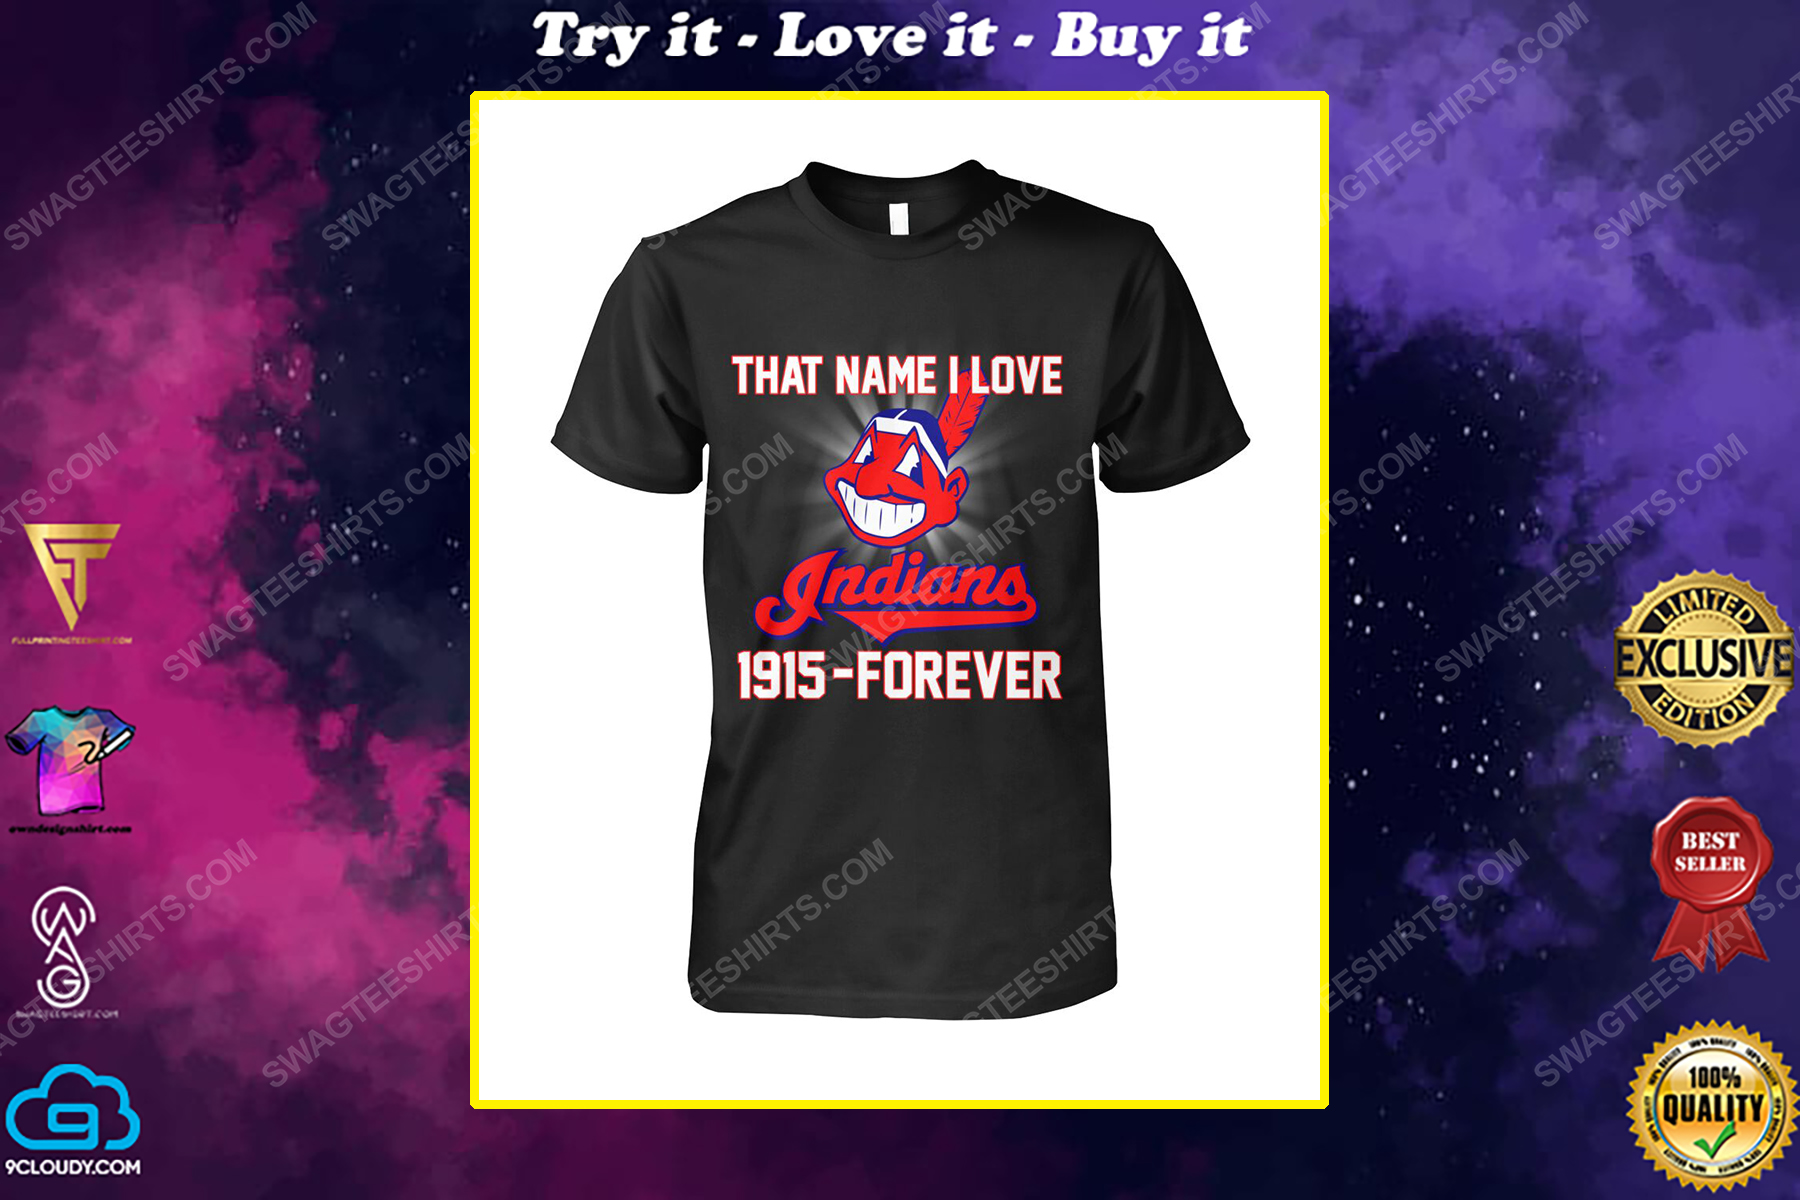 That name i love cleveland indians 1915 forever shirt